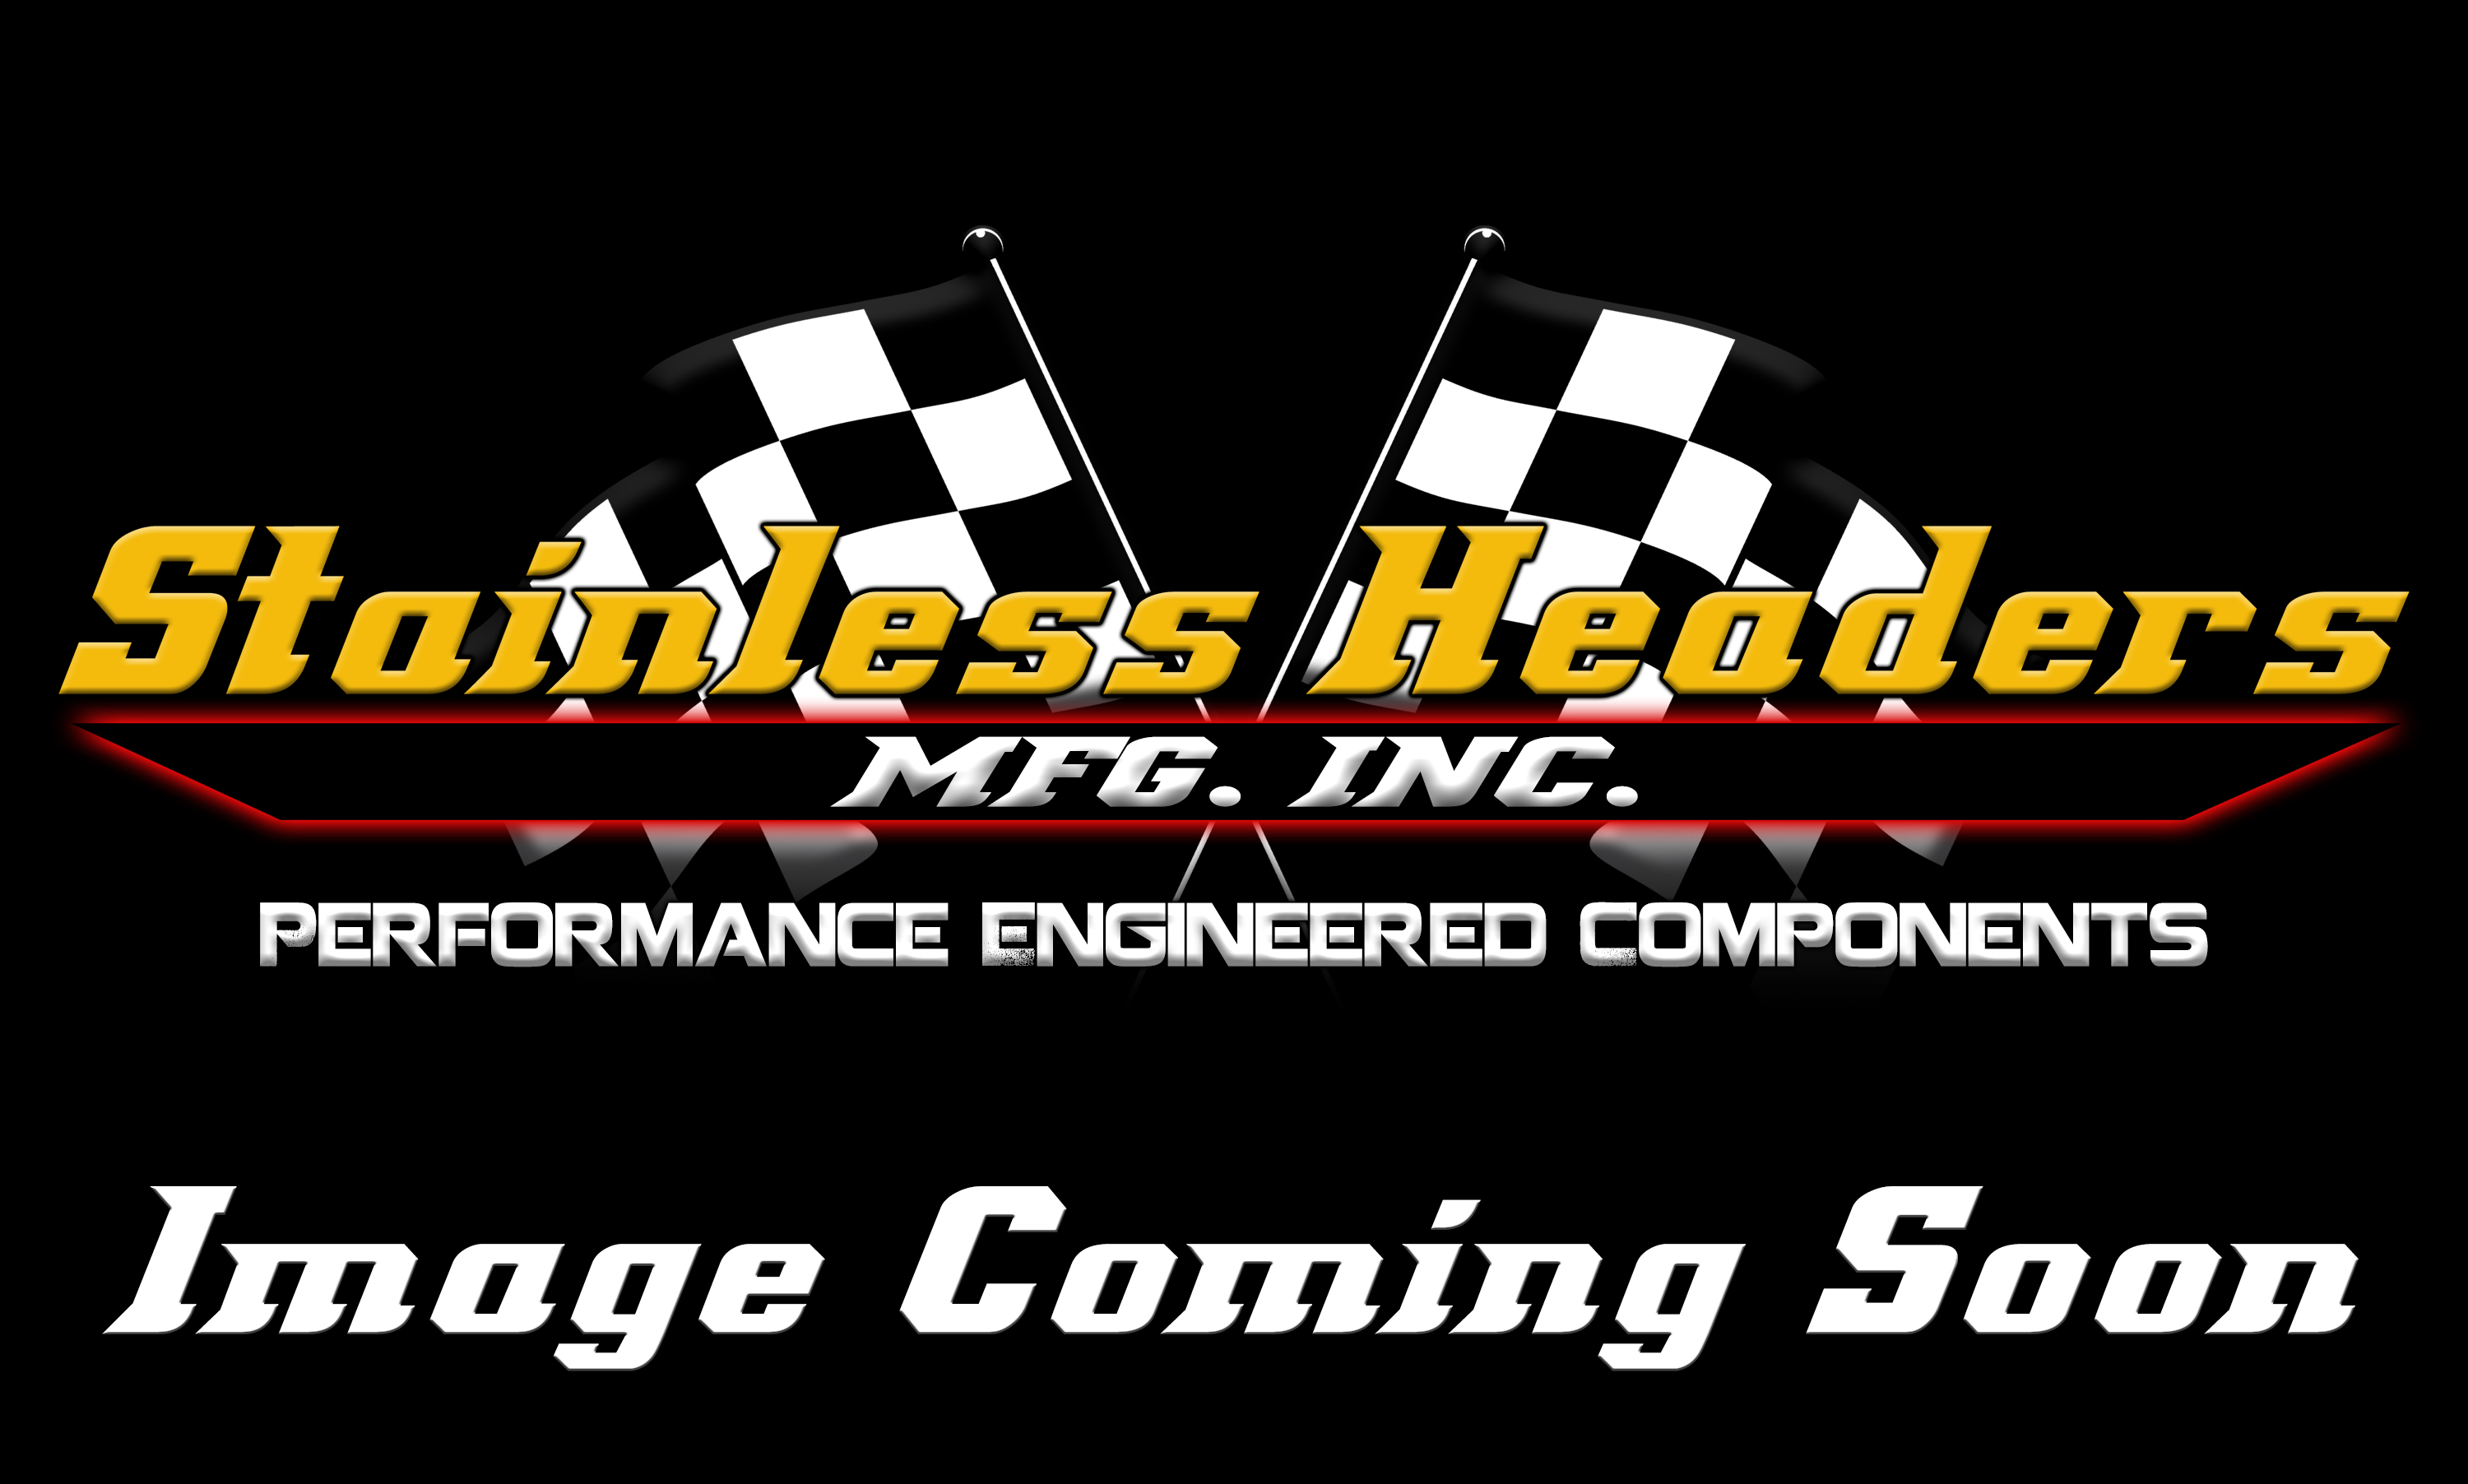 Stainless Headers - 1 7/8" Primary 8 into 1 Performance Merge Collector-16ga 304ss